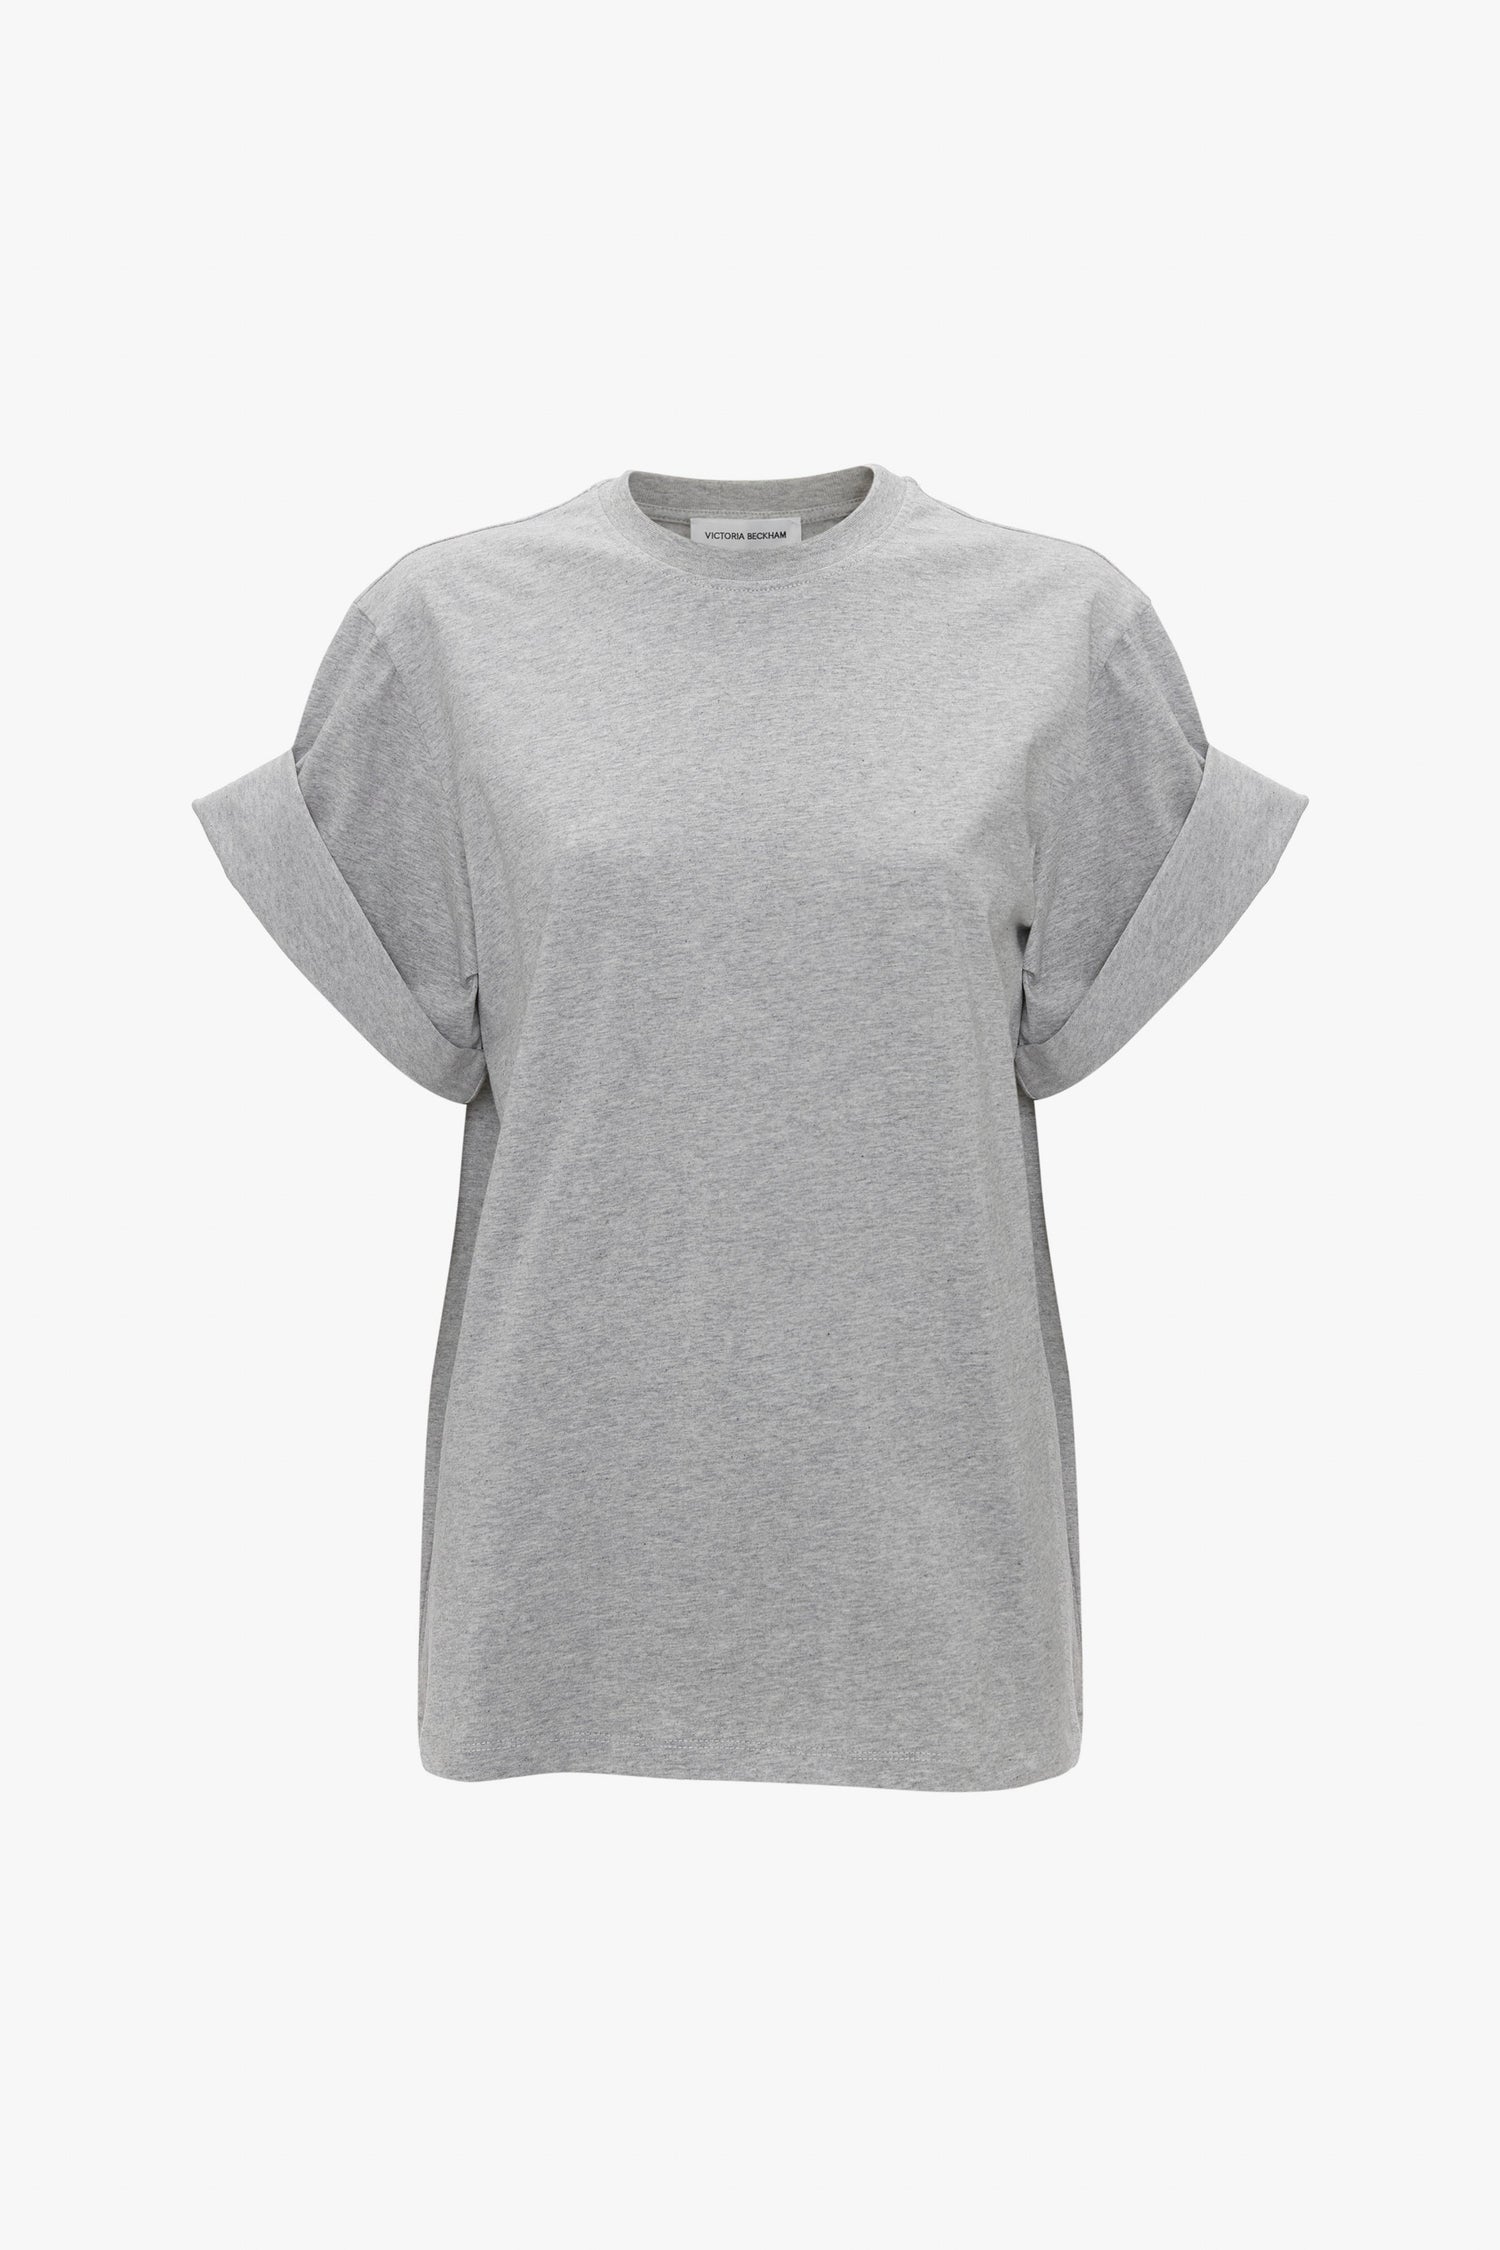 A Victoria Beckham Asymmetric Relaxed Fit T-Shirt In Grey Marl displayed on a white background.